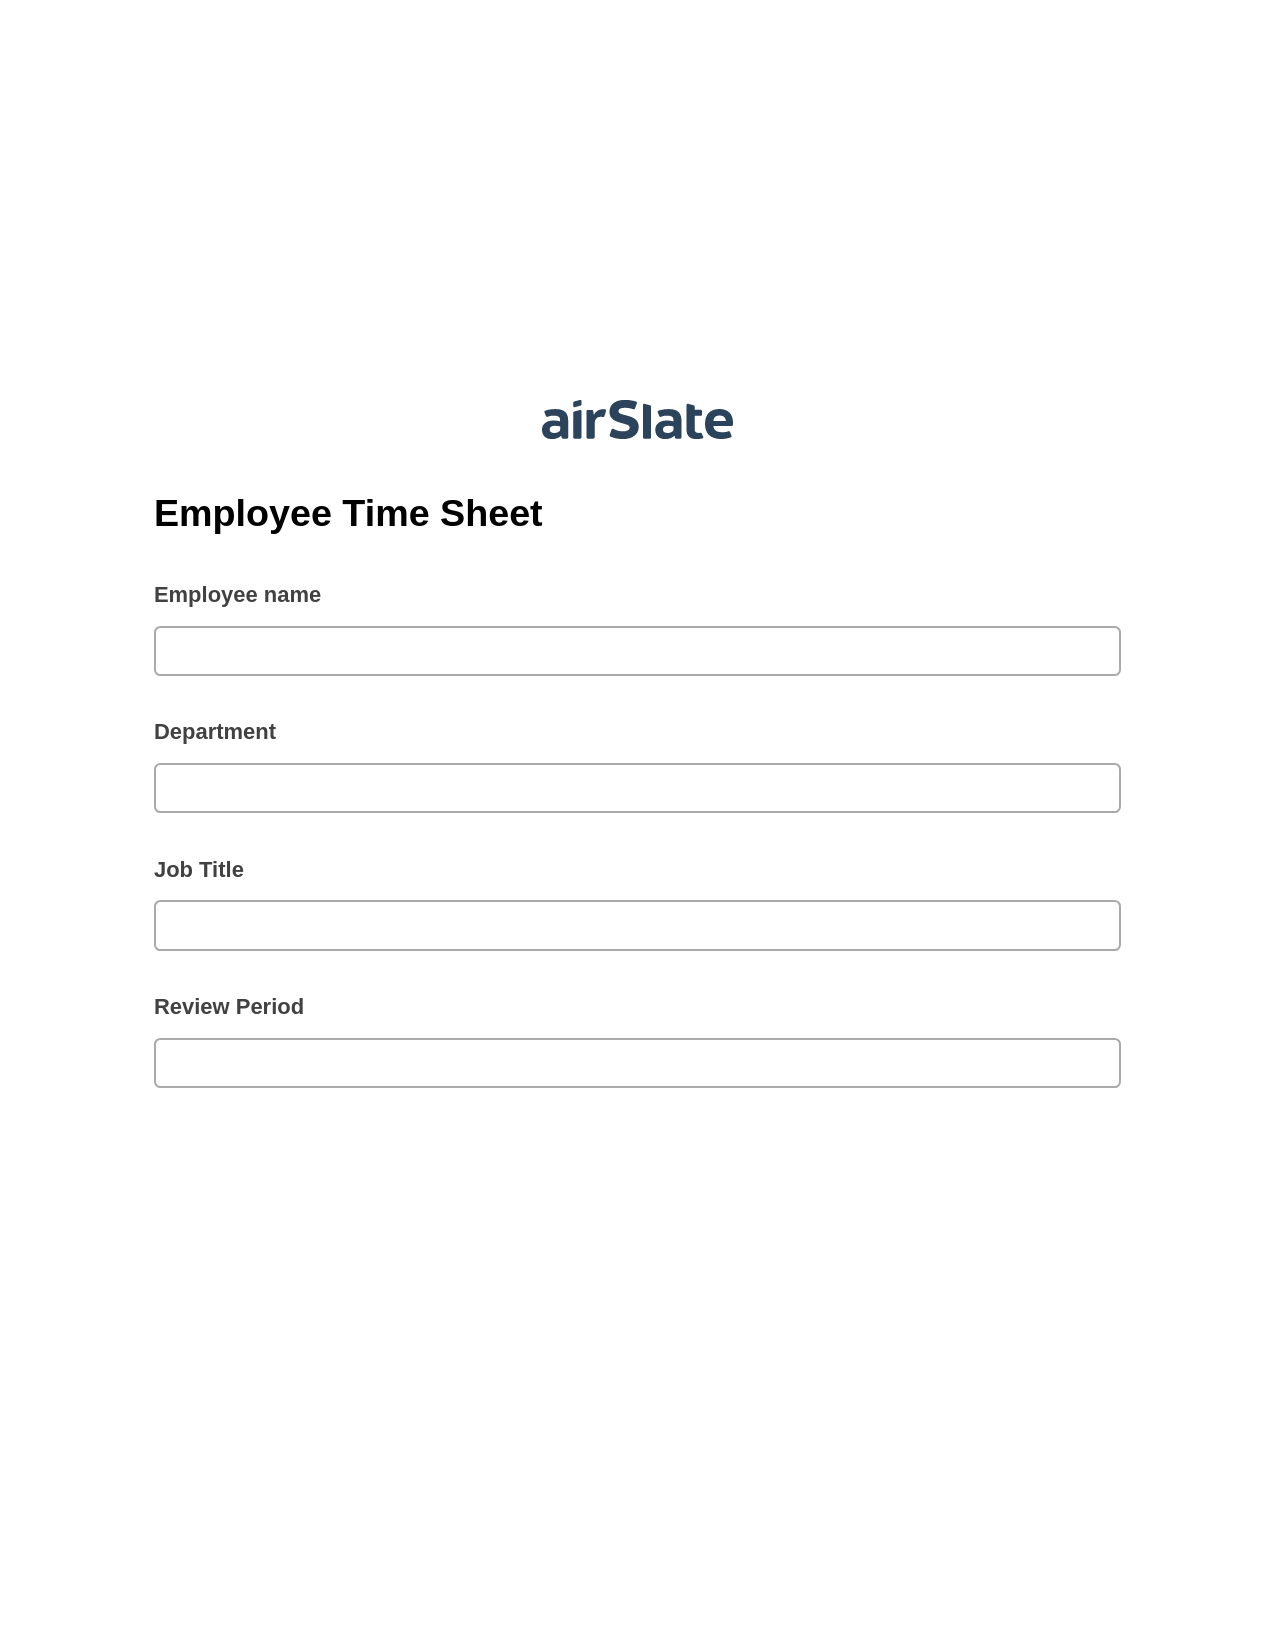 Employee Time Sheet Pre-fill from CSV File Bot, Update Audit Trail Bot, Export to Smartsheet